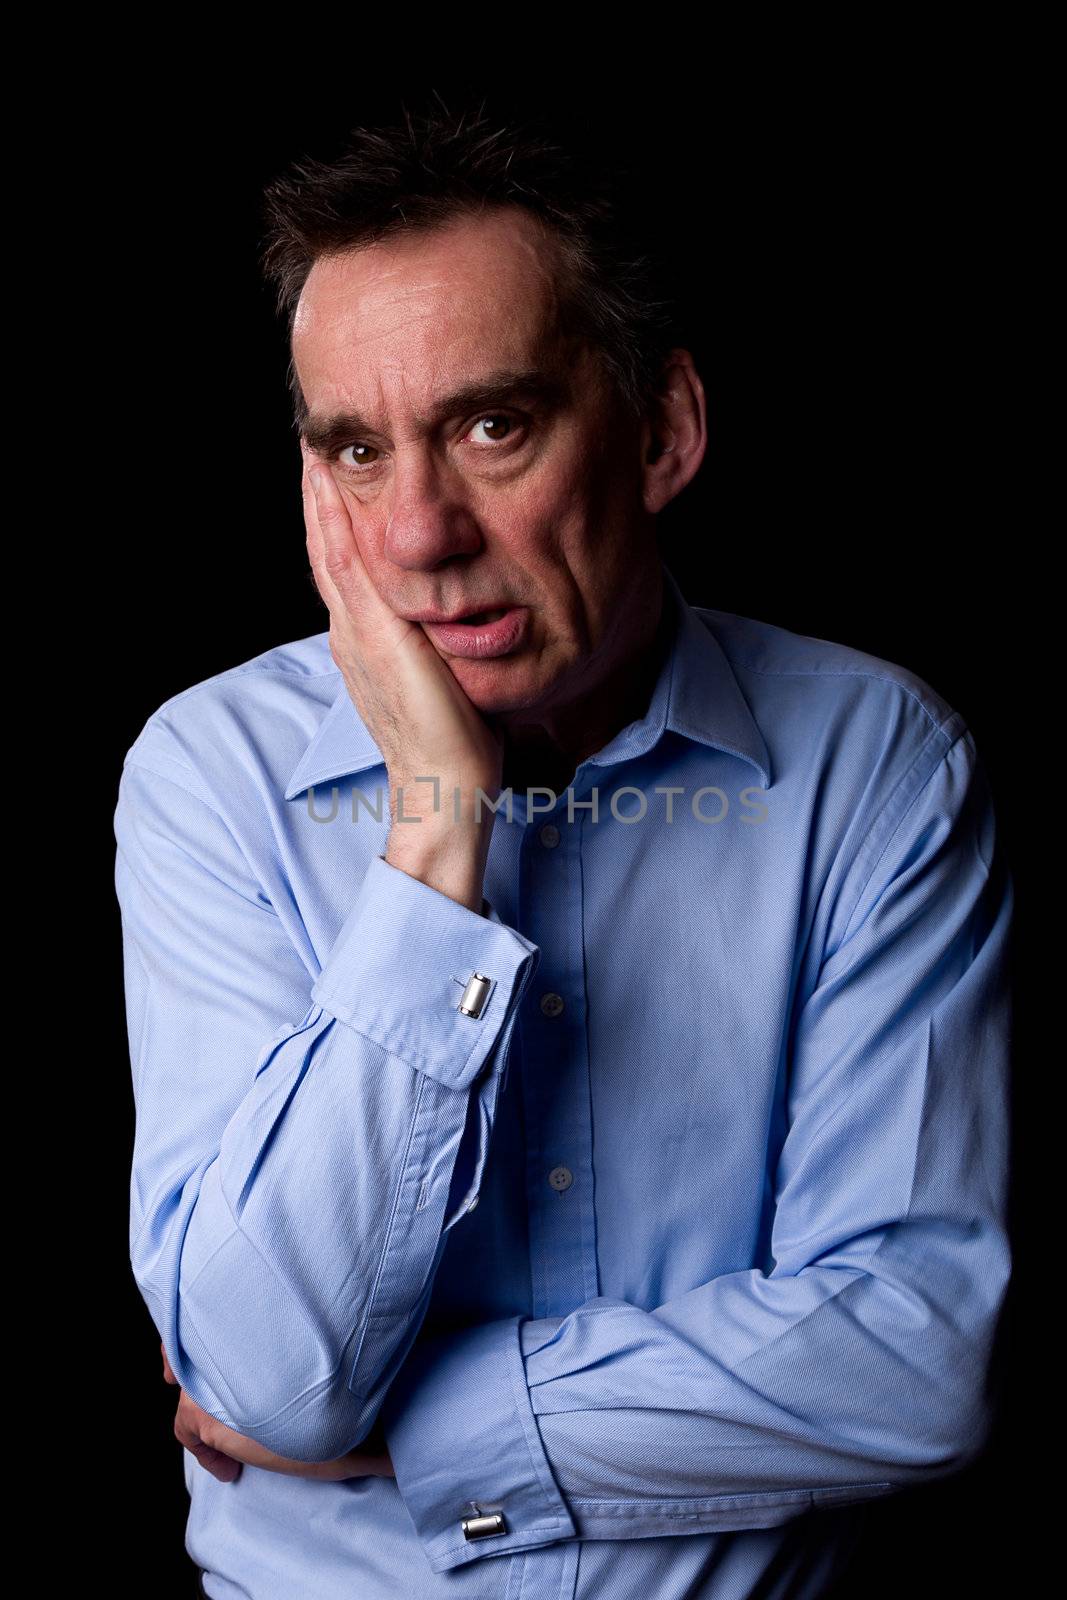 Sad Anxious Depressed Middle Age Business Man with Hand to Chin Black Background